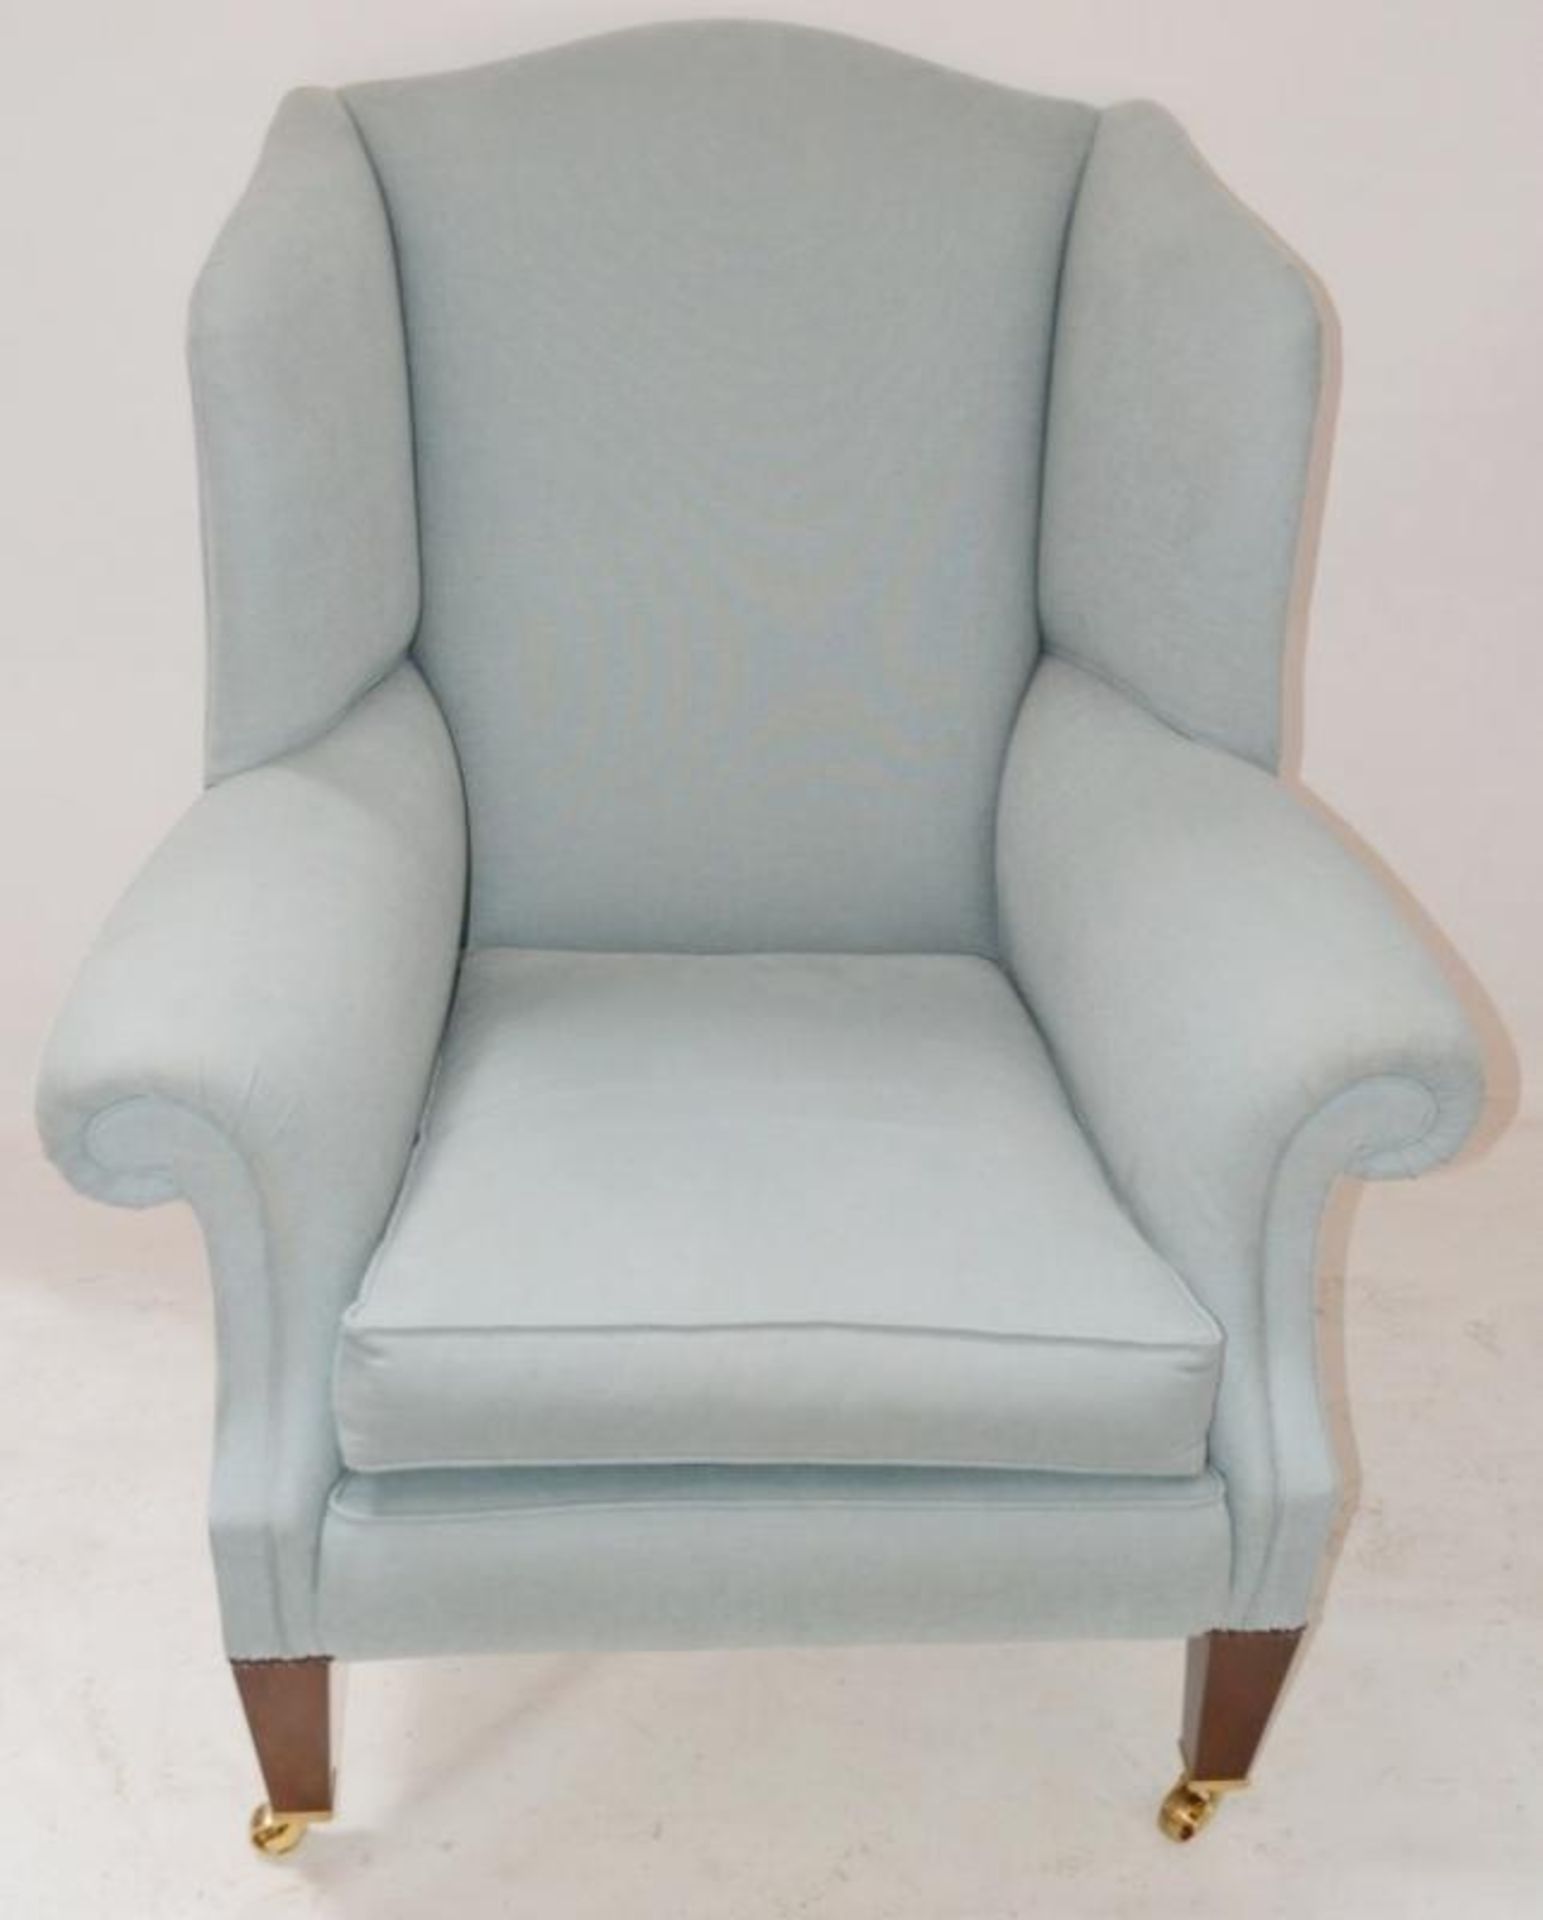 1 x Duresta "Somerset" Wing Chair Light Blue - Dimensions: 113H x 91W x 92D cms - Ref: 3143184-A NP1 - Image 4 of 7